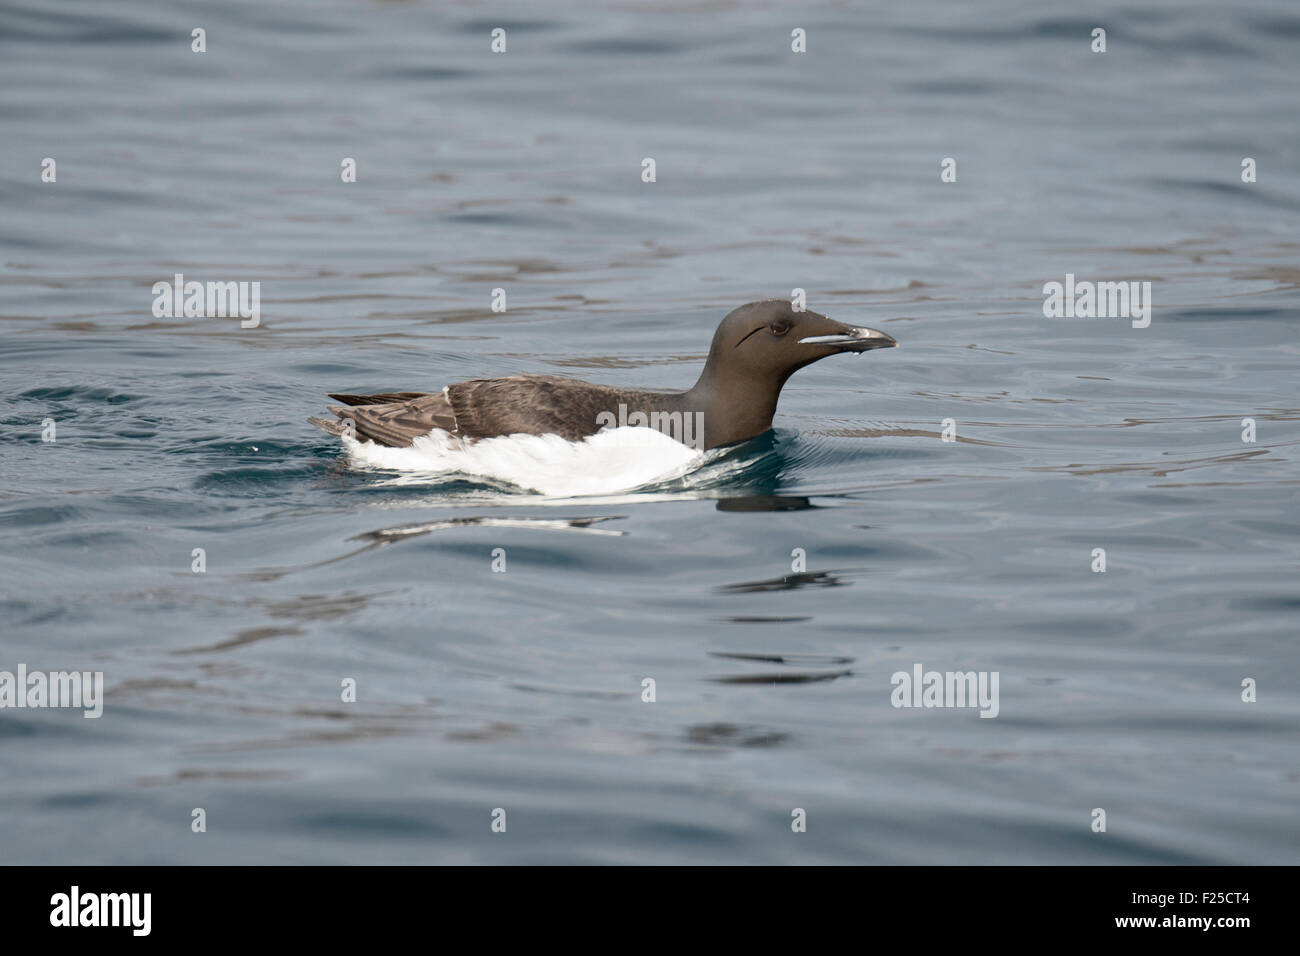 Thick-billed murre or Brünnich's guillemot, Uria lomvia, adult on water, Baffin Island, Canadian Arctic Stock Photo